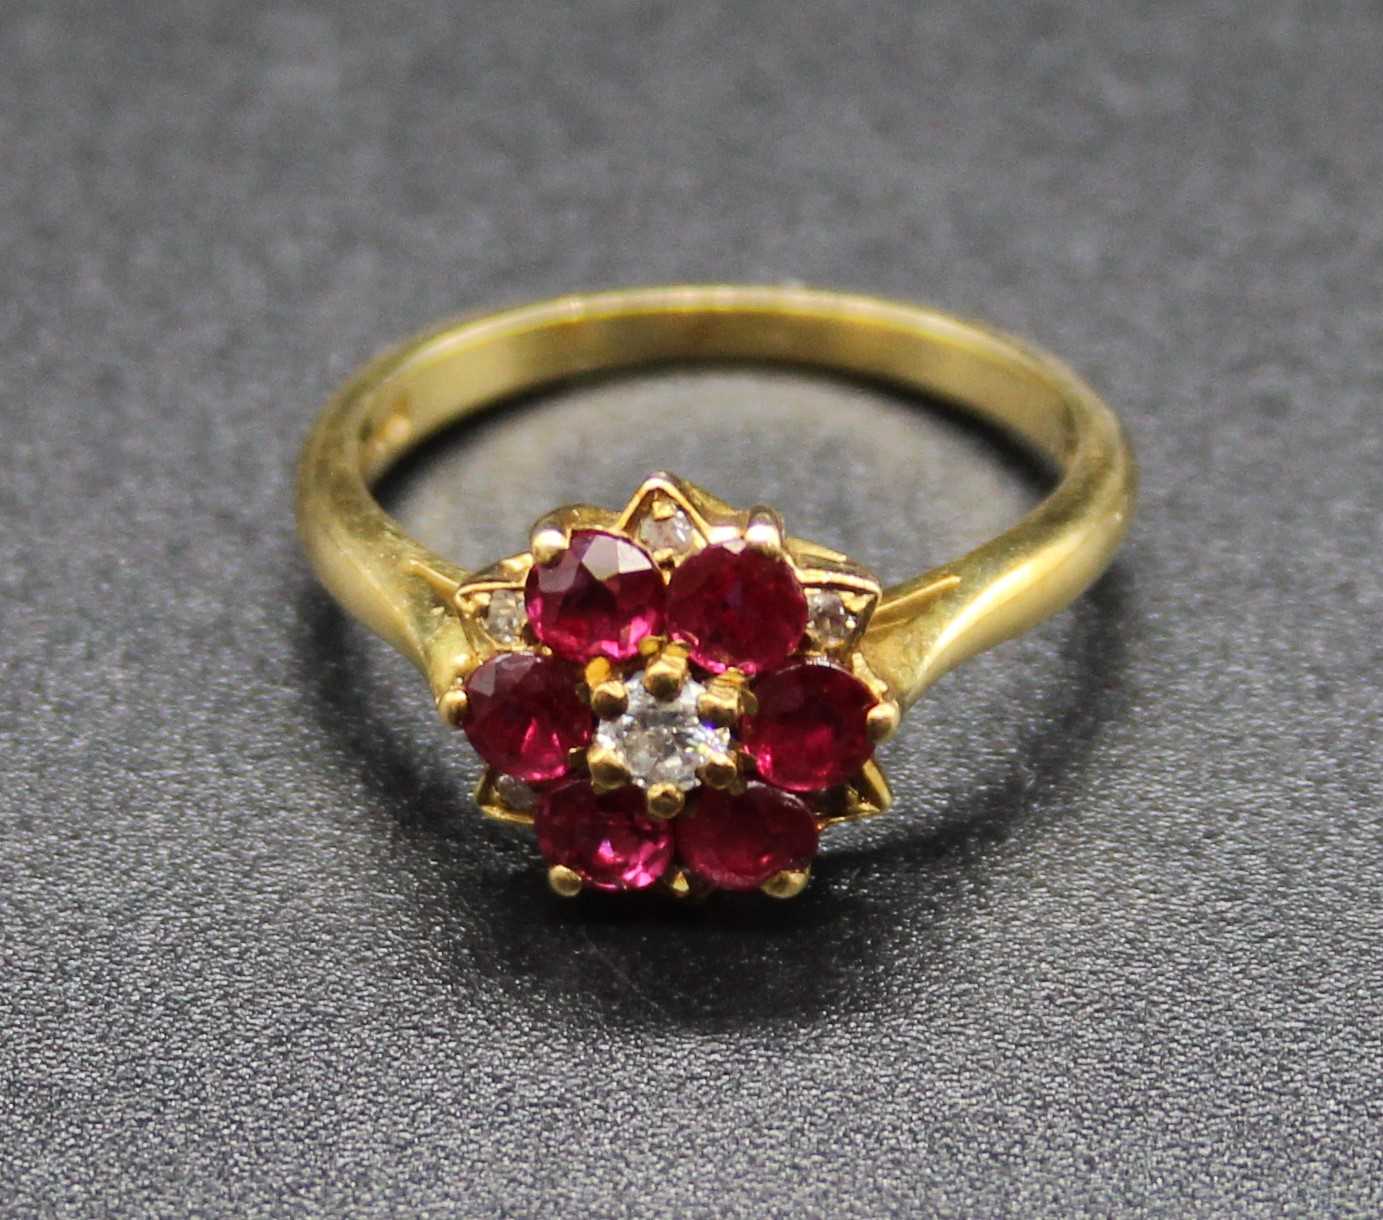 An 18ct gold, ruby and diamond cluster ring (rubies possibly heat-treated), setting dia.10mm, 2.